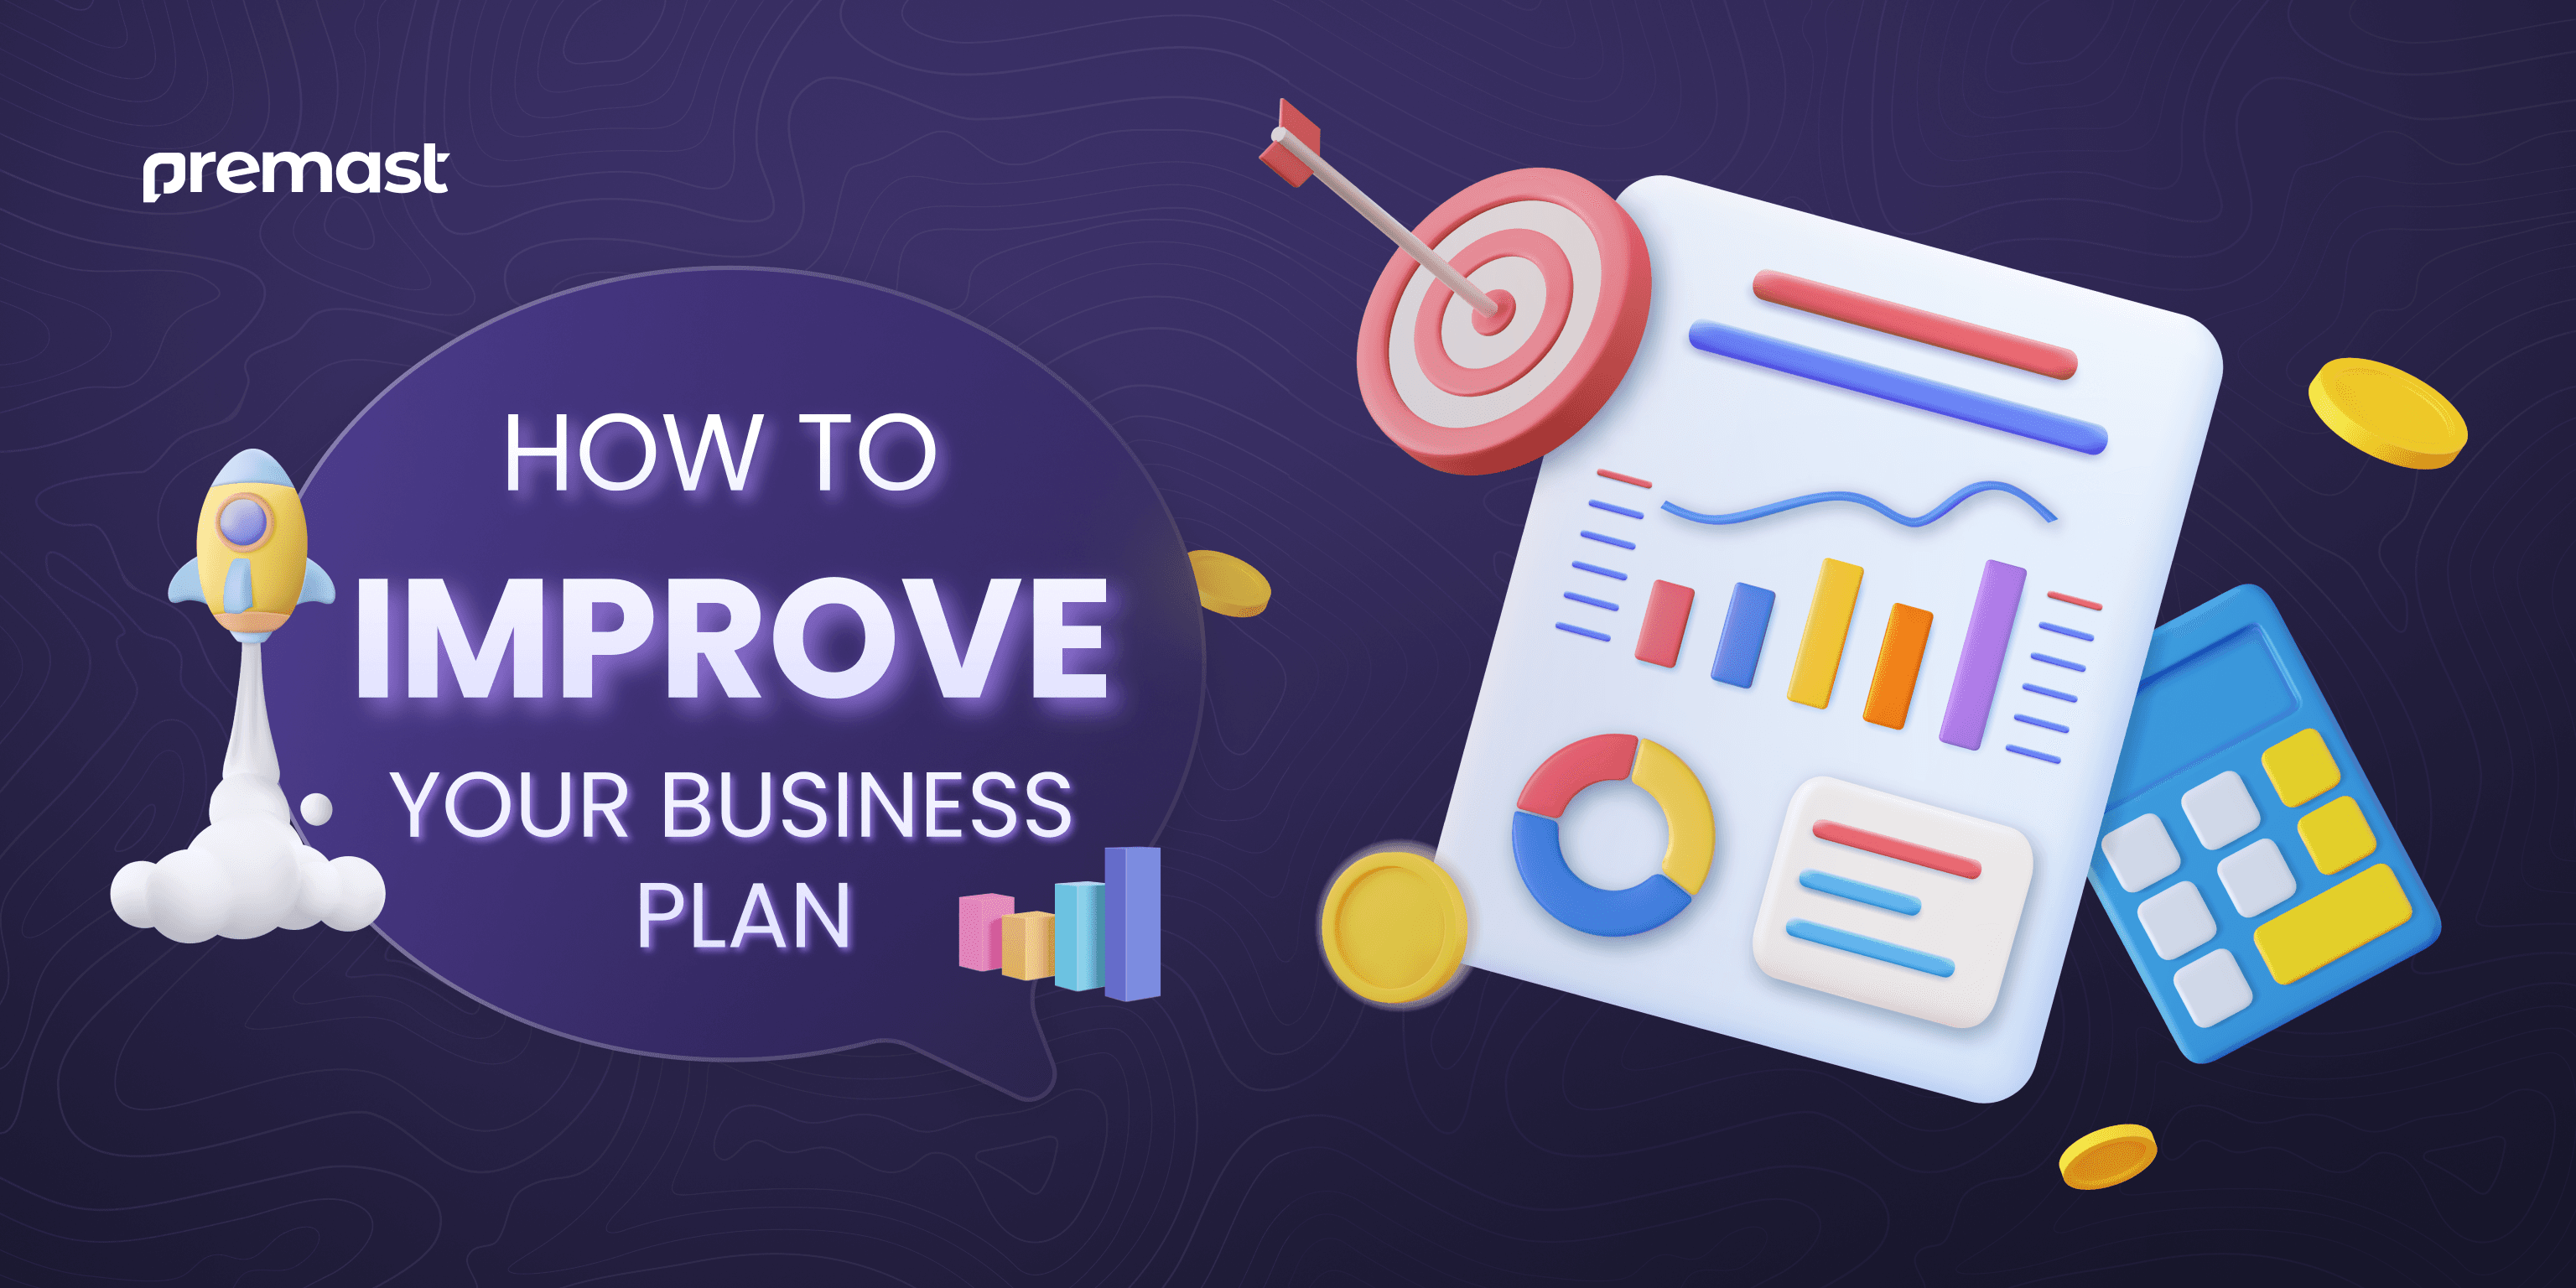 How to Improve Your Business Plan.